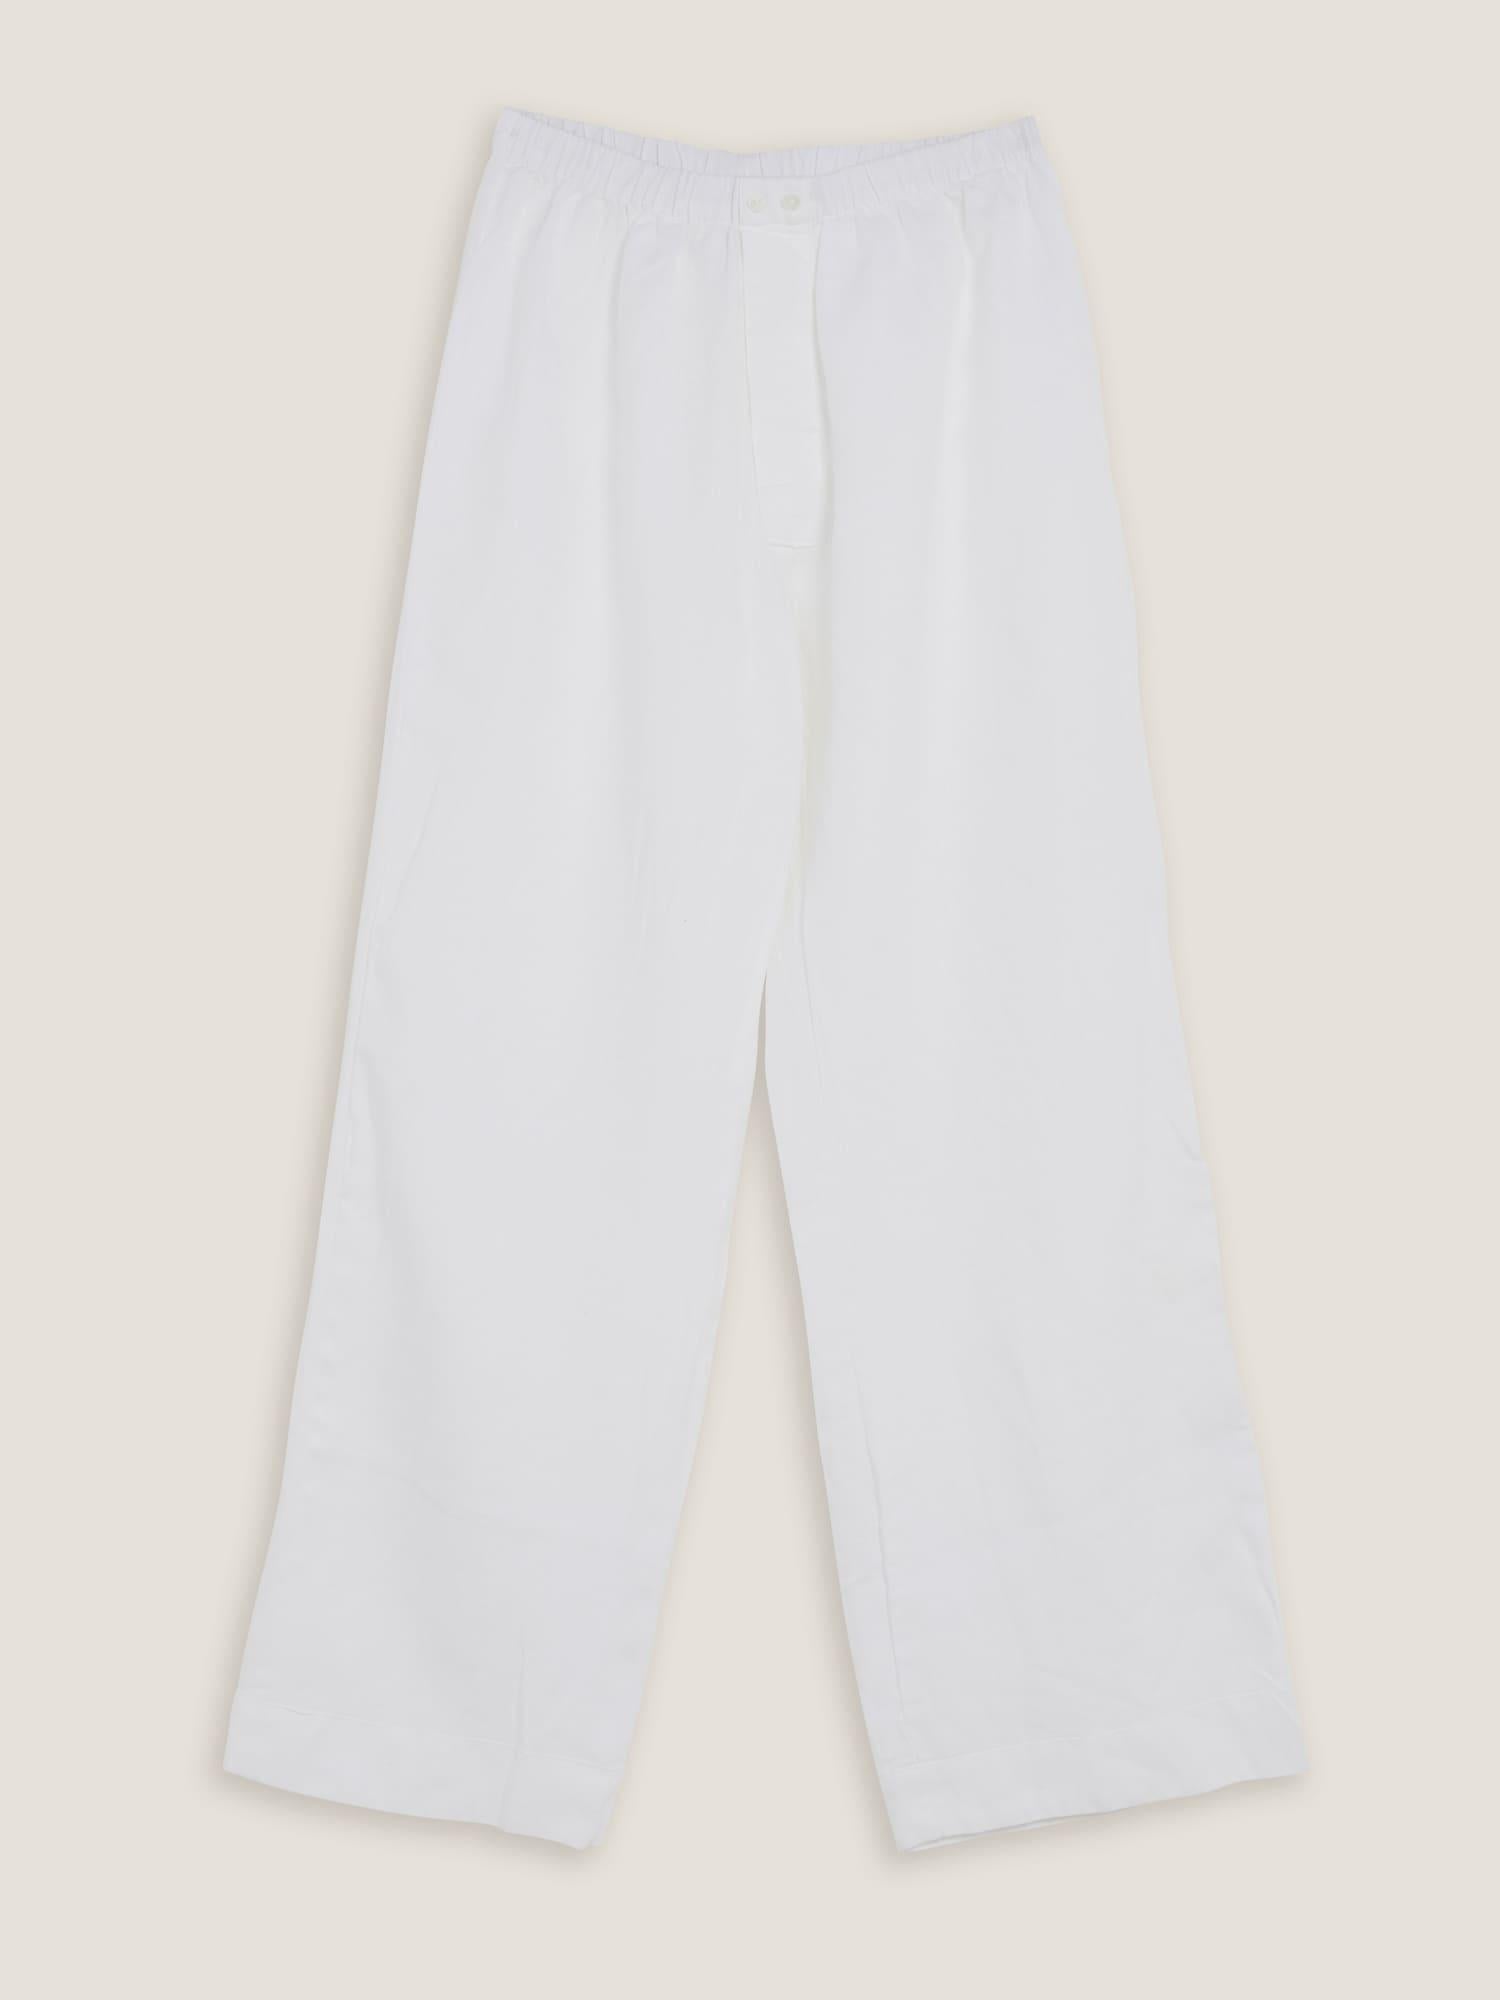 Pants in White